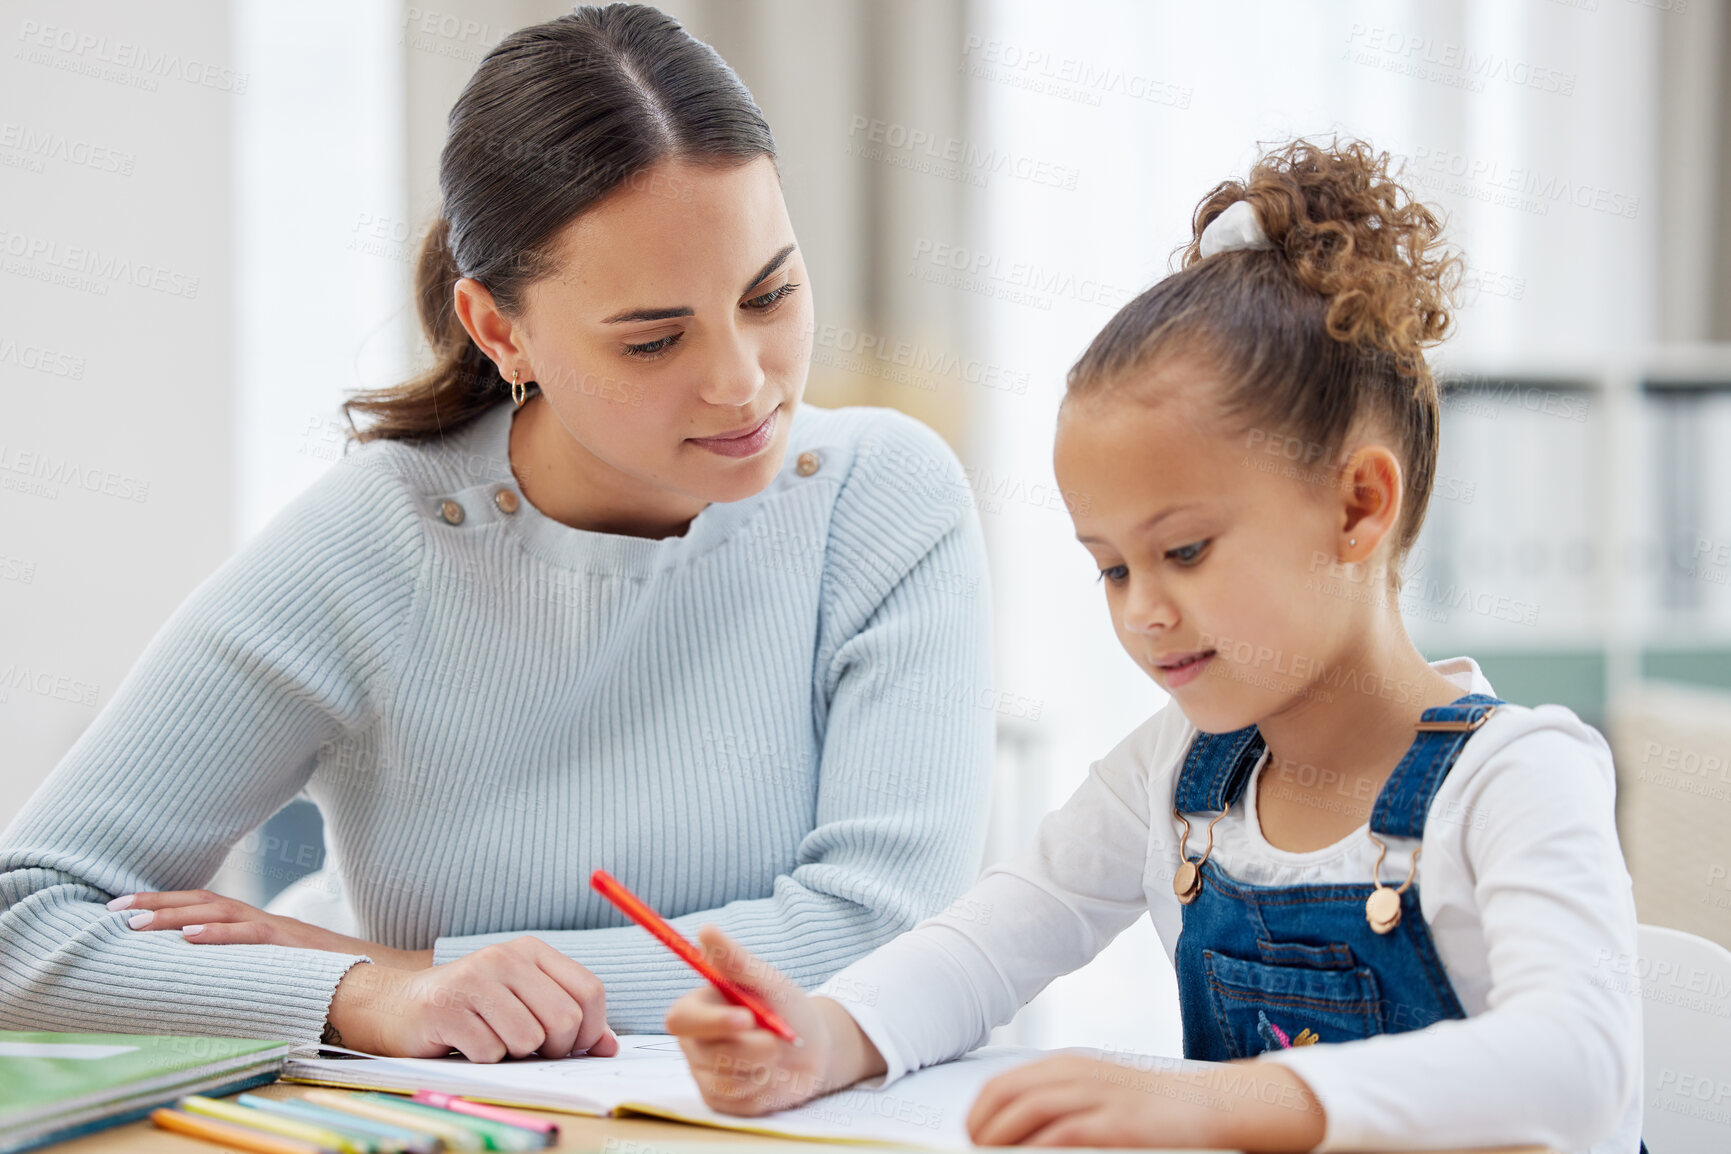 Buy stock photo Shot of a young mother helping her daughter with her homework at home